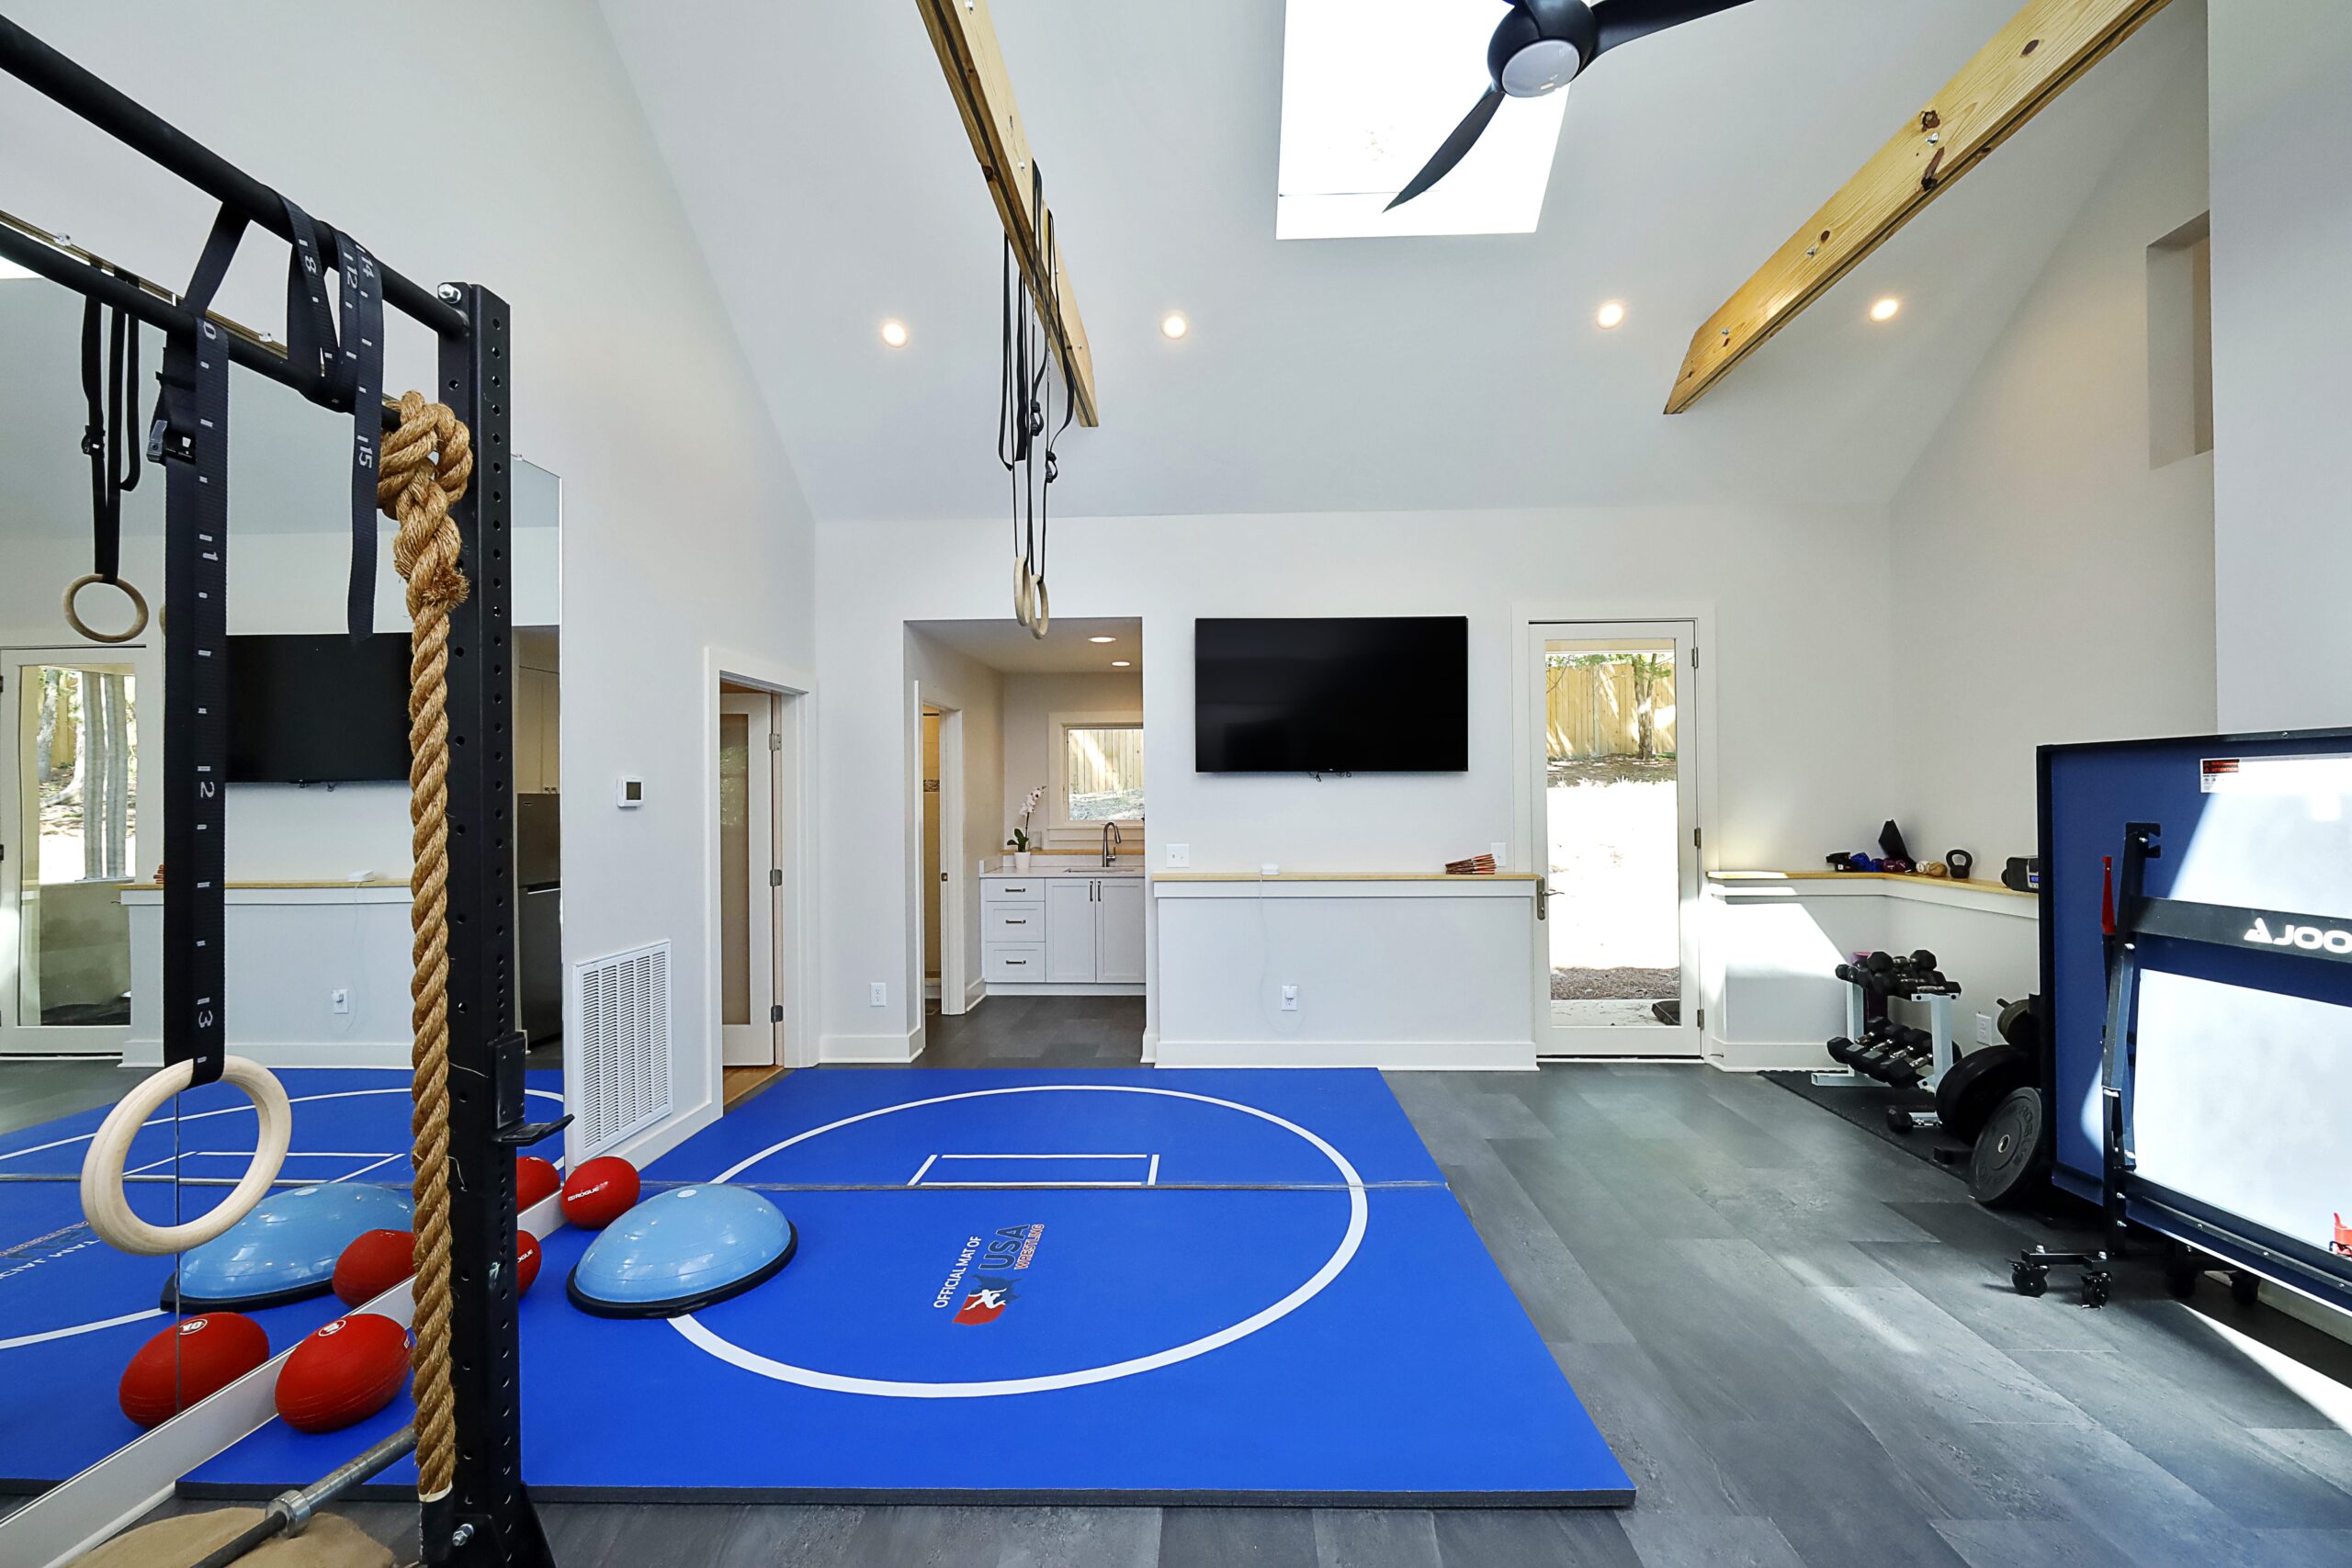 A view of the home gym looking towards the kitchenette. Skylights in the high ceiling bring ample light into the space.